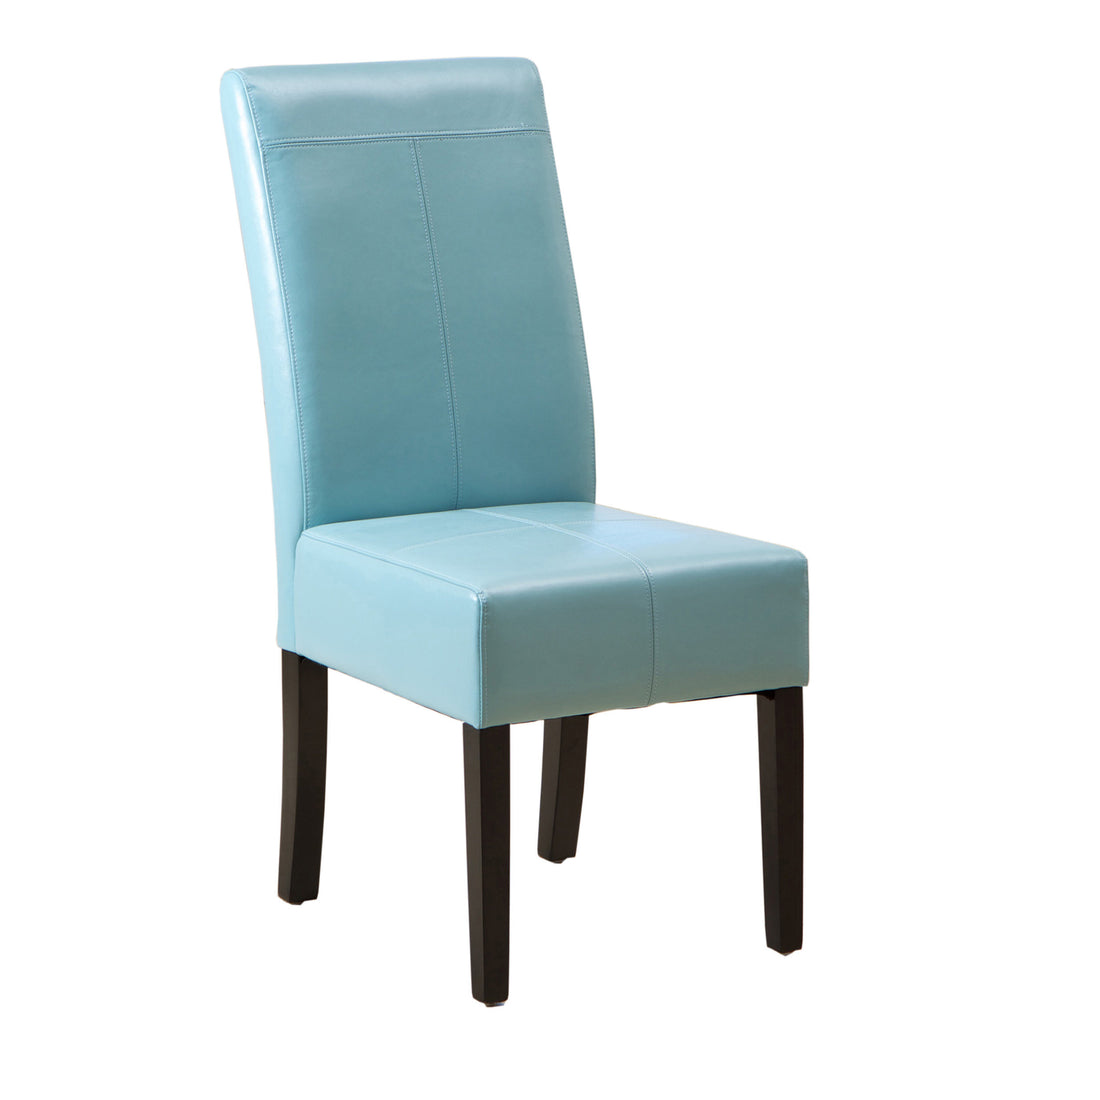 Pertica Kd Dining Chair - Teal Blue Leather